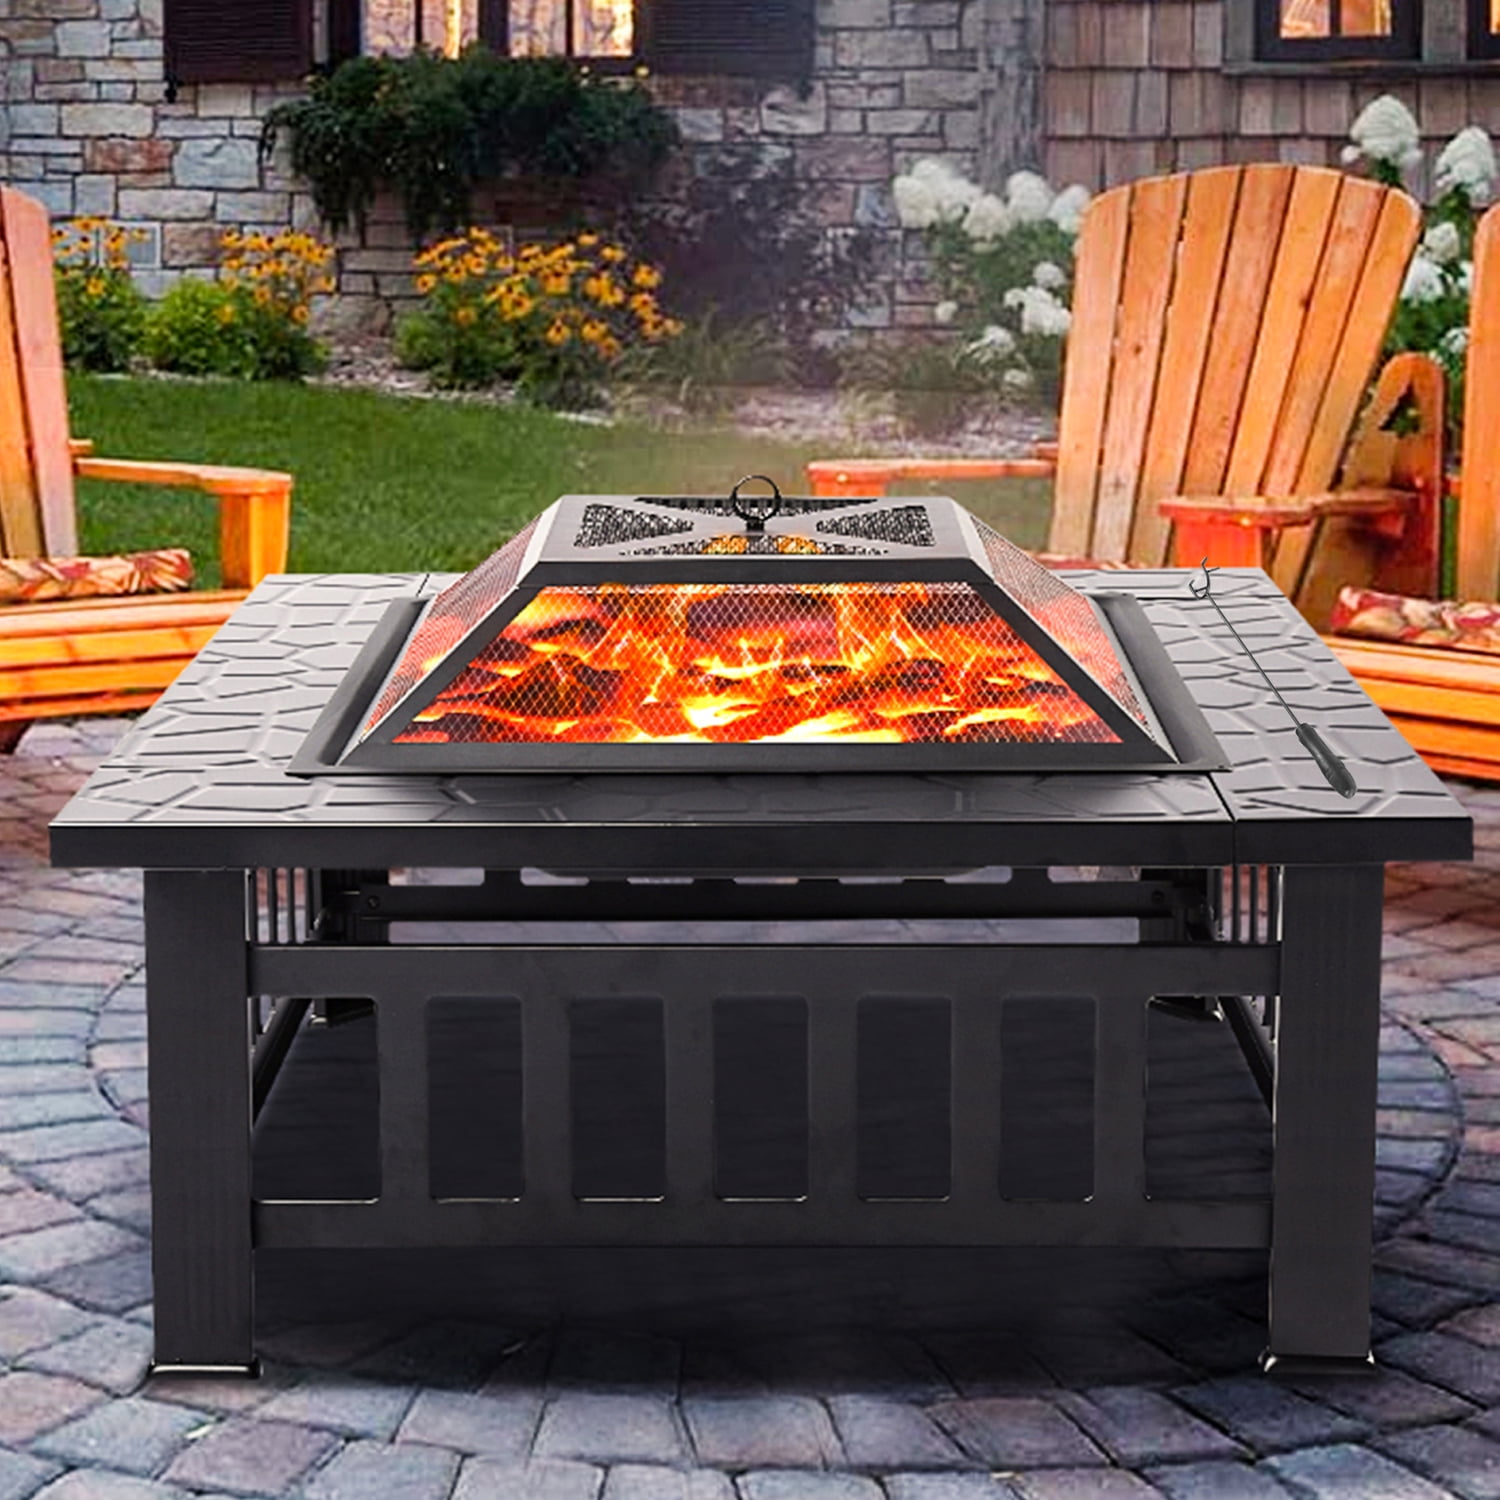 Details about   Outdoor Wood Burning Fire Pit Square Steel Heater Backyard Patio BBQ Garden 